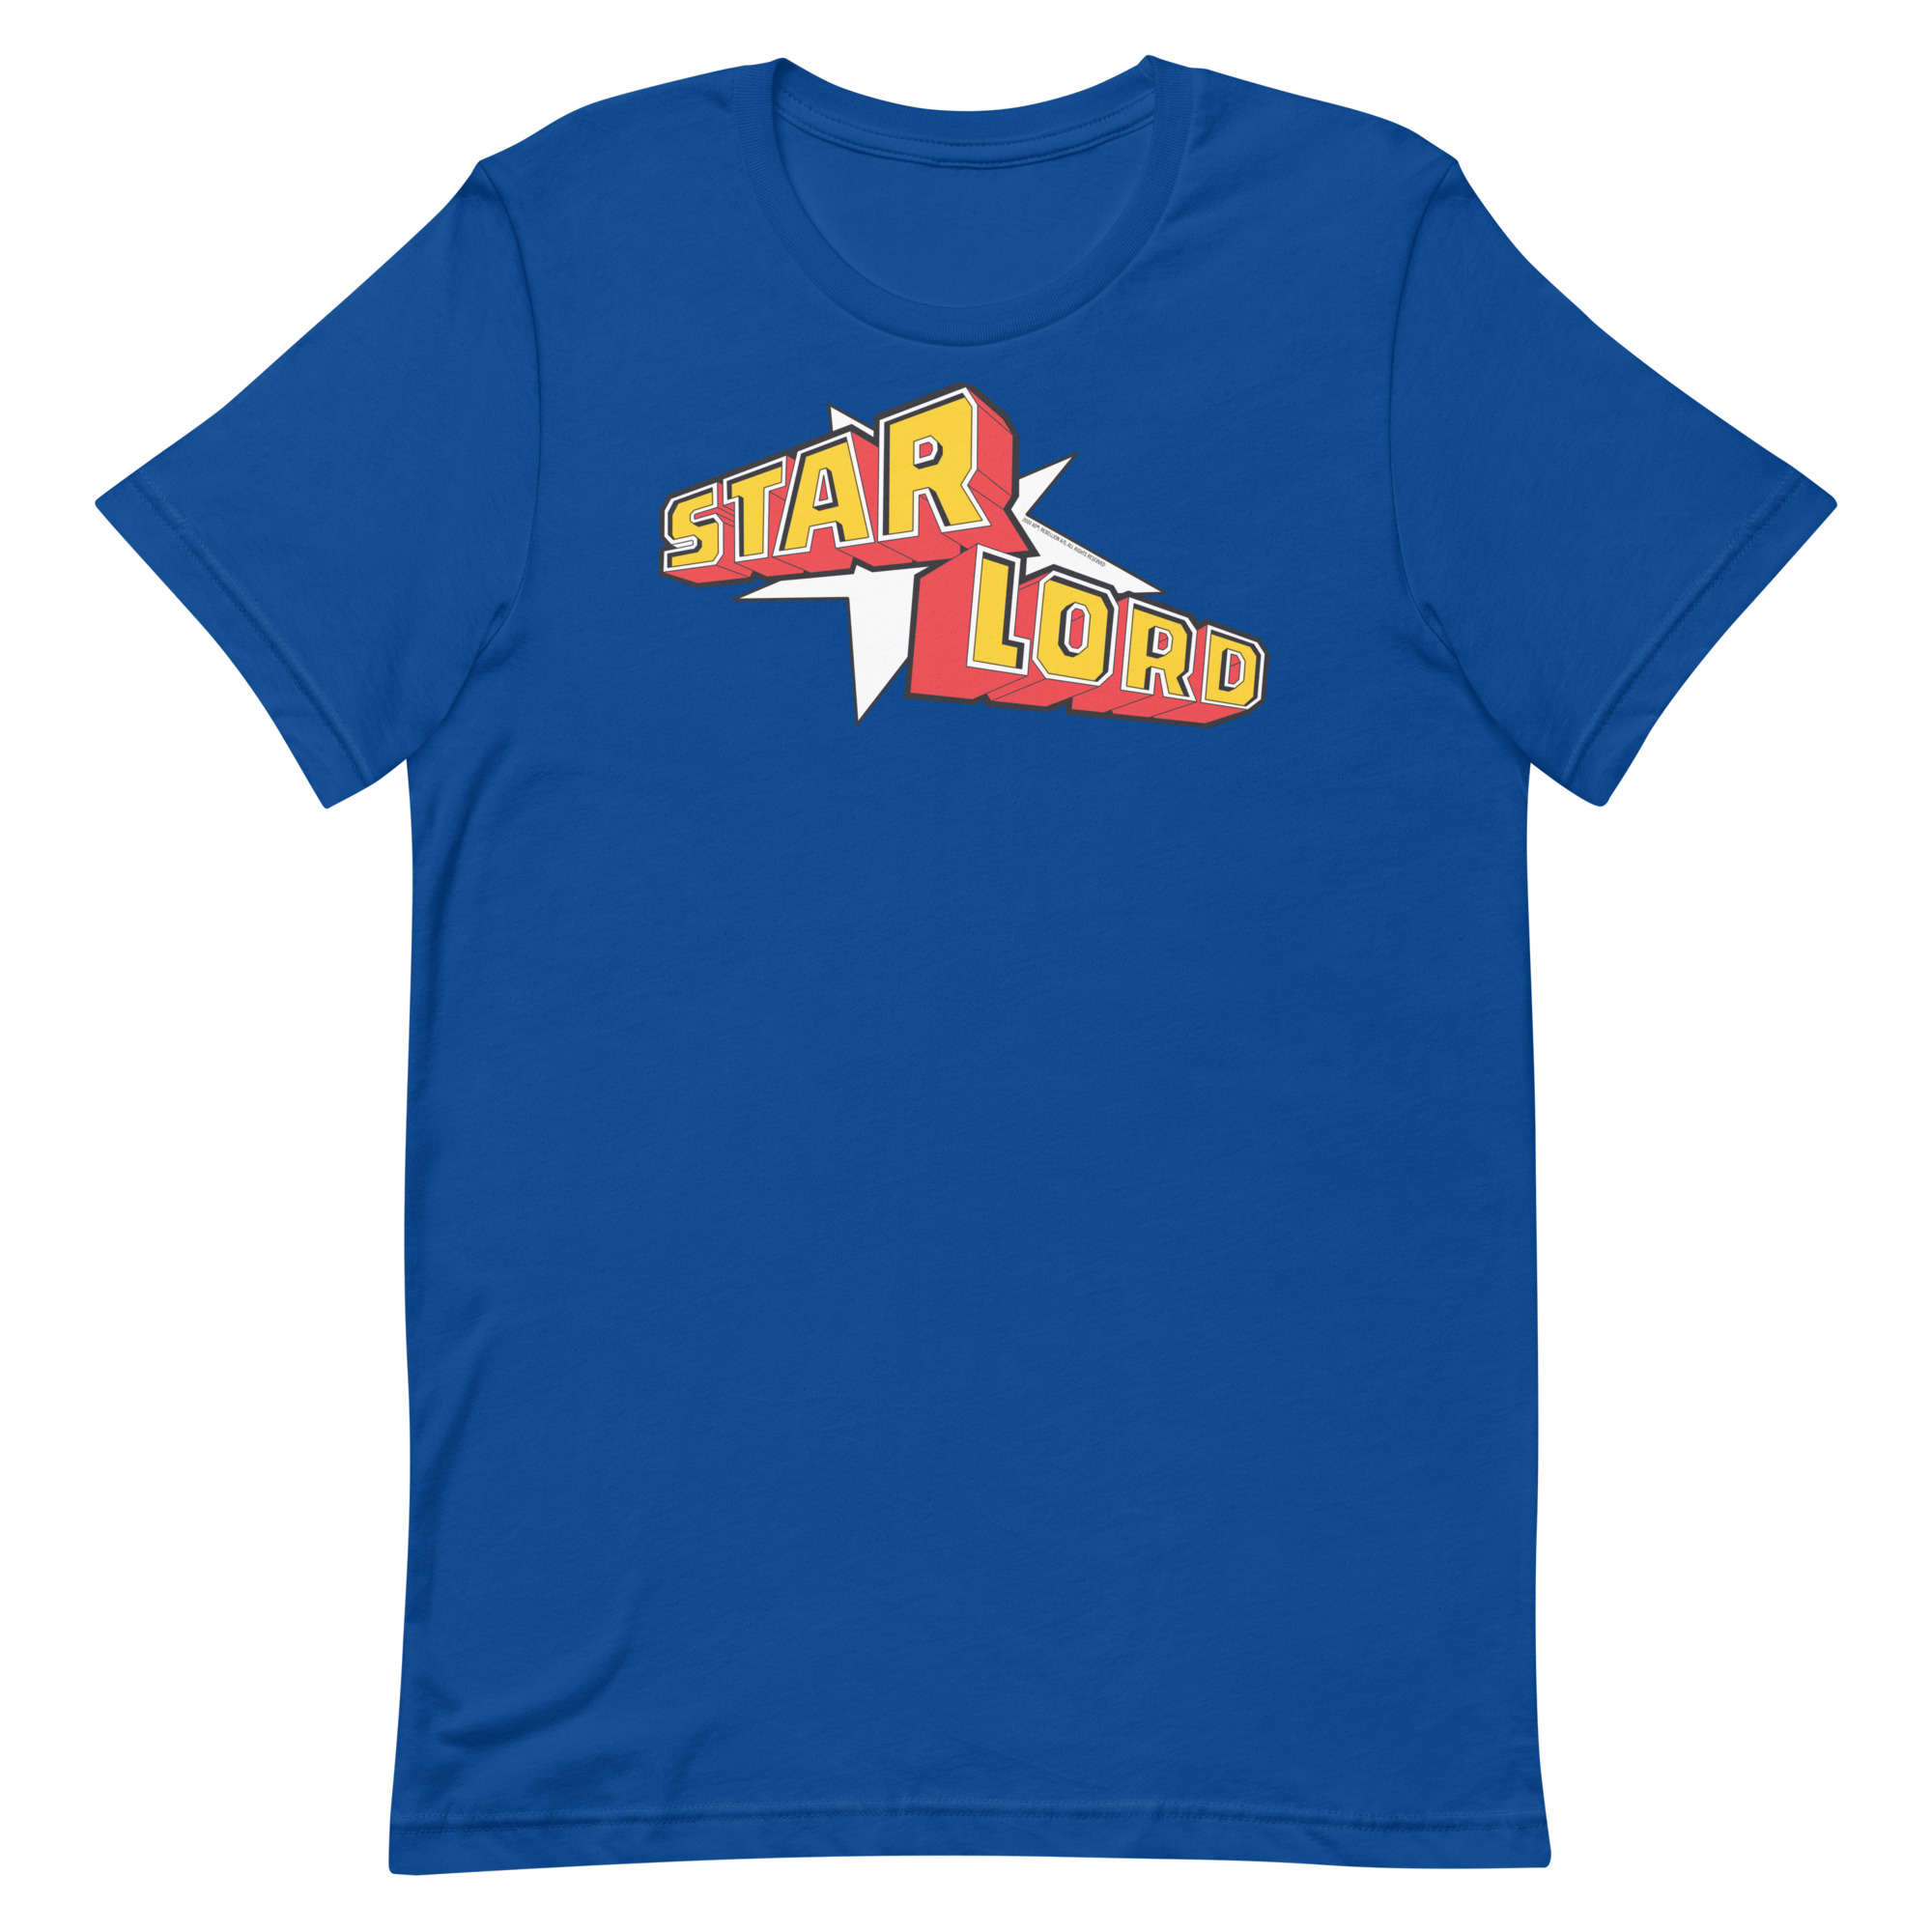 Image of a Royal Blue coloured Star Lord t-shirt featuring a large Star Lord logo in the middle